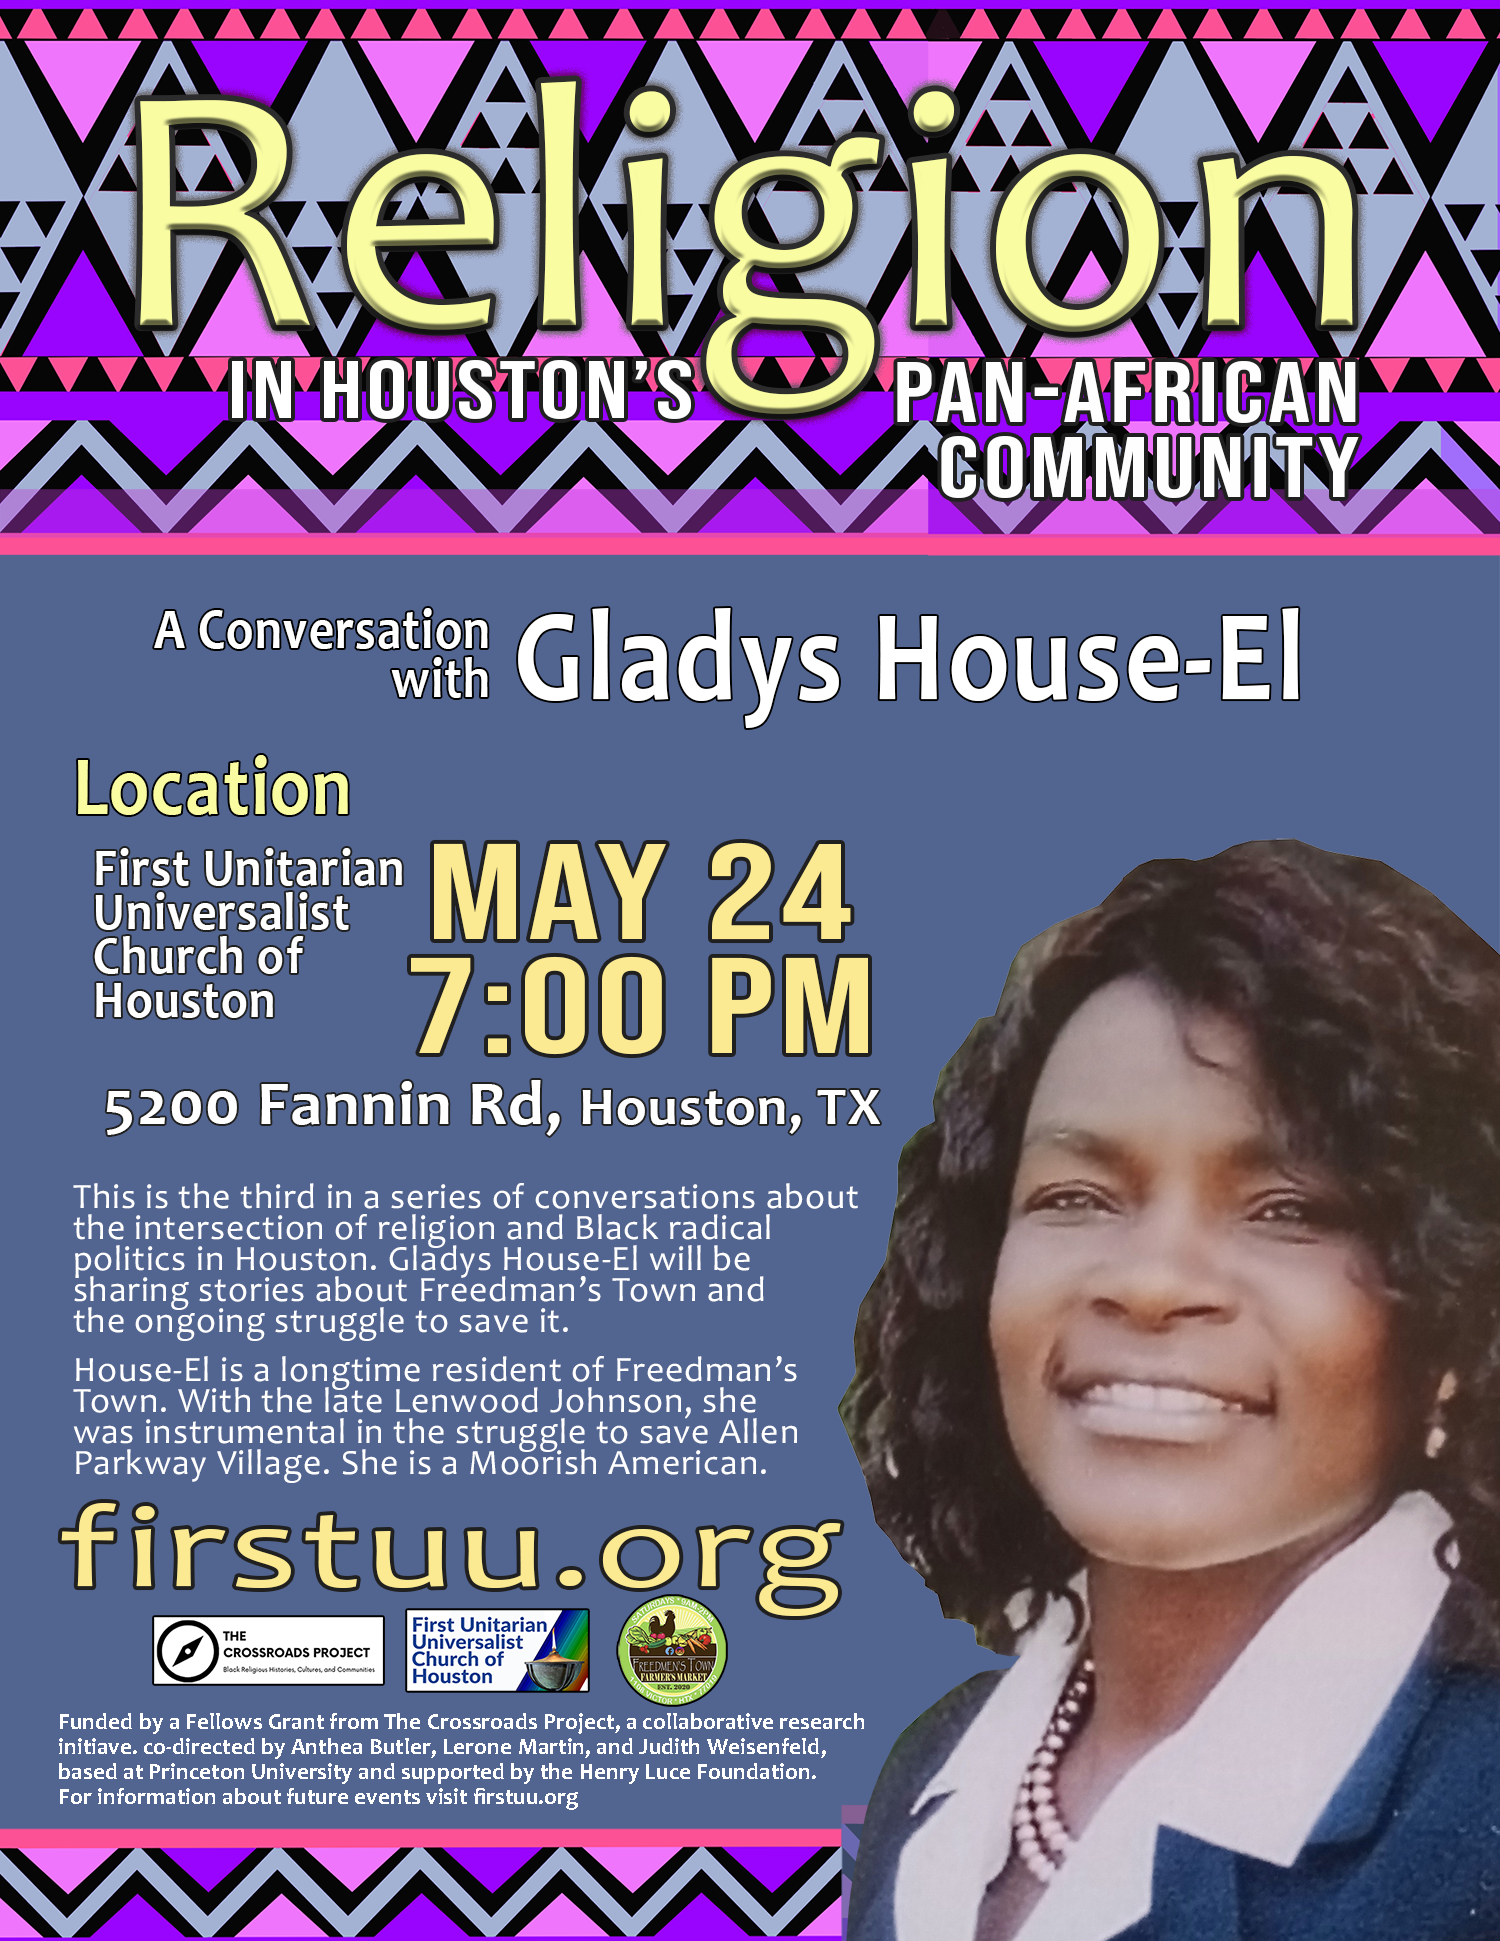 Religion in Houstons Pan-African Community -- A conversation with Gladys House-El